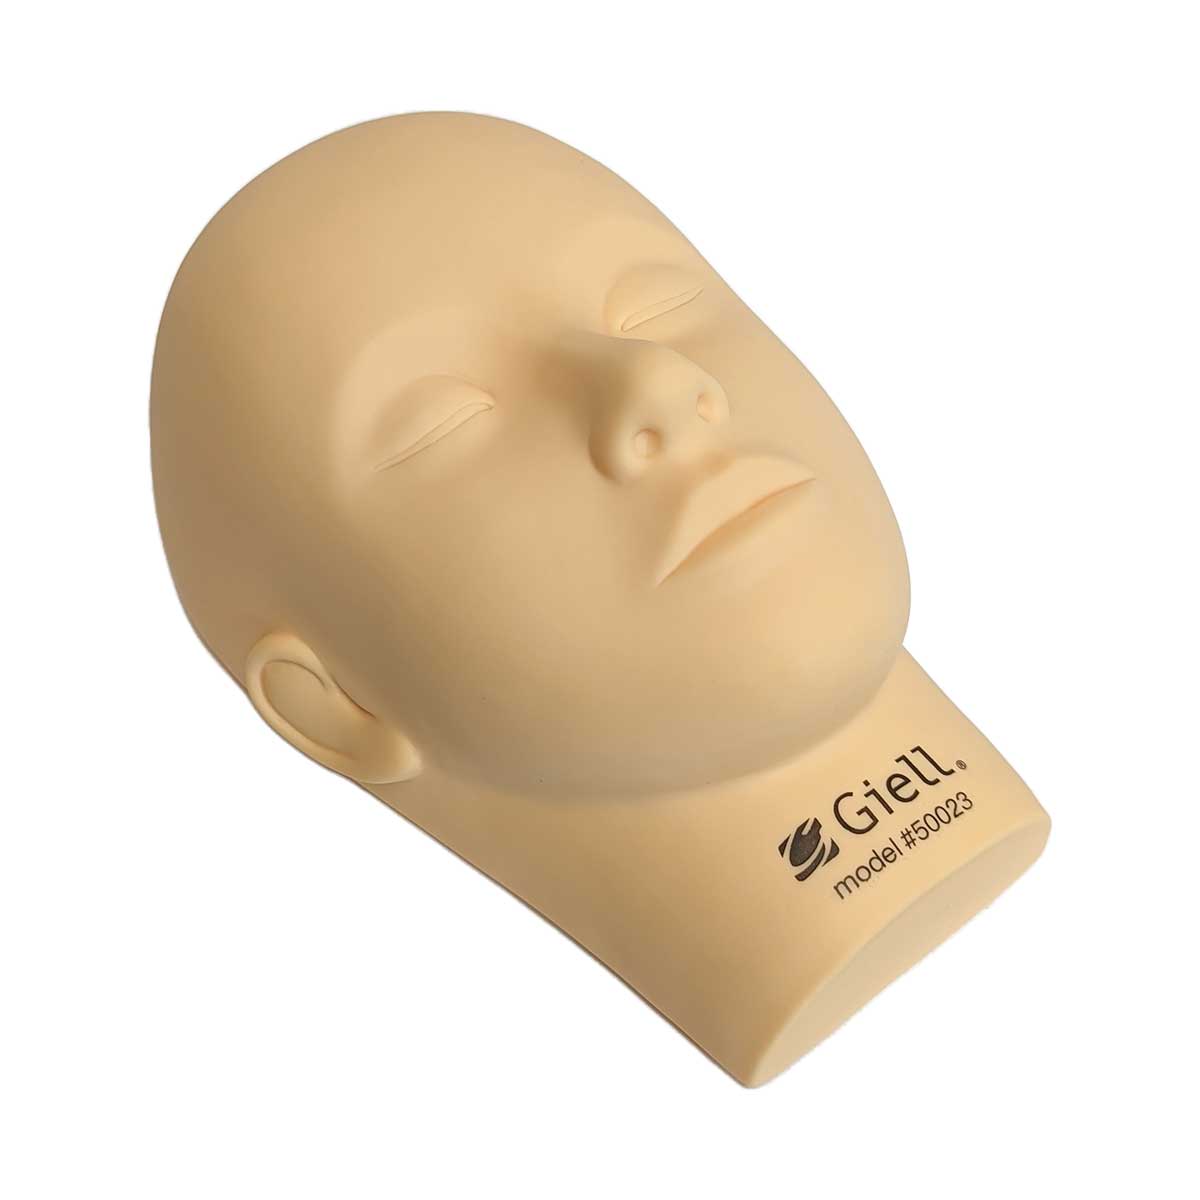 Facial Massage and Makeup Training Mannequin Head by Giell